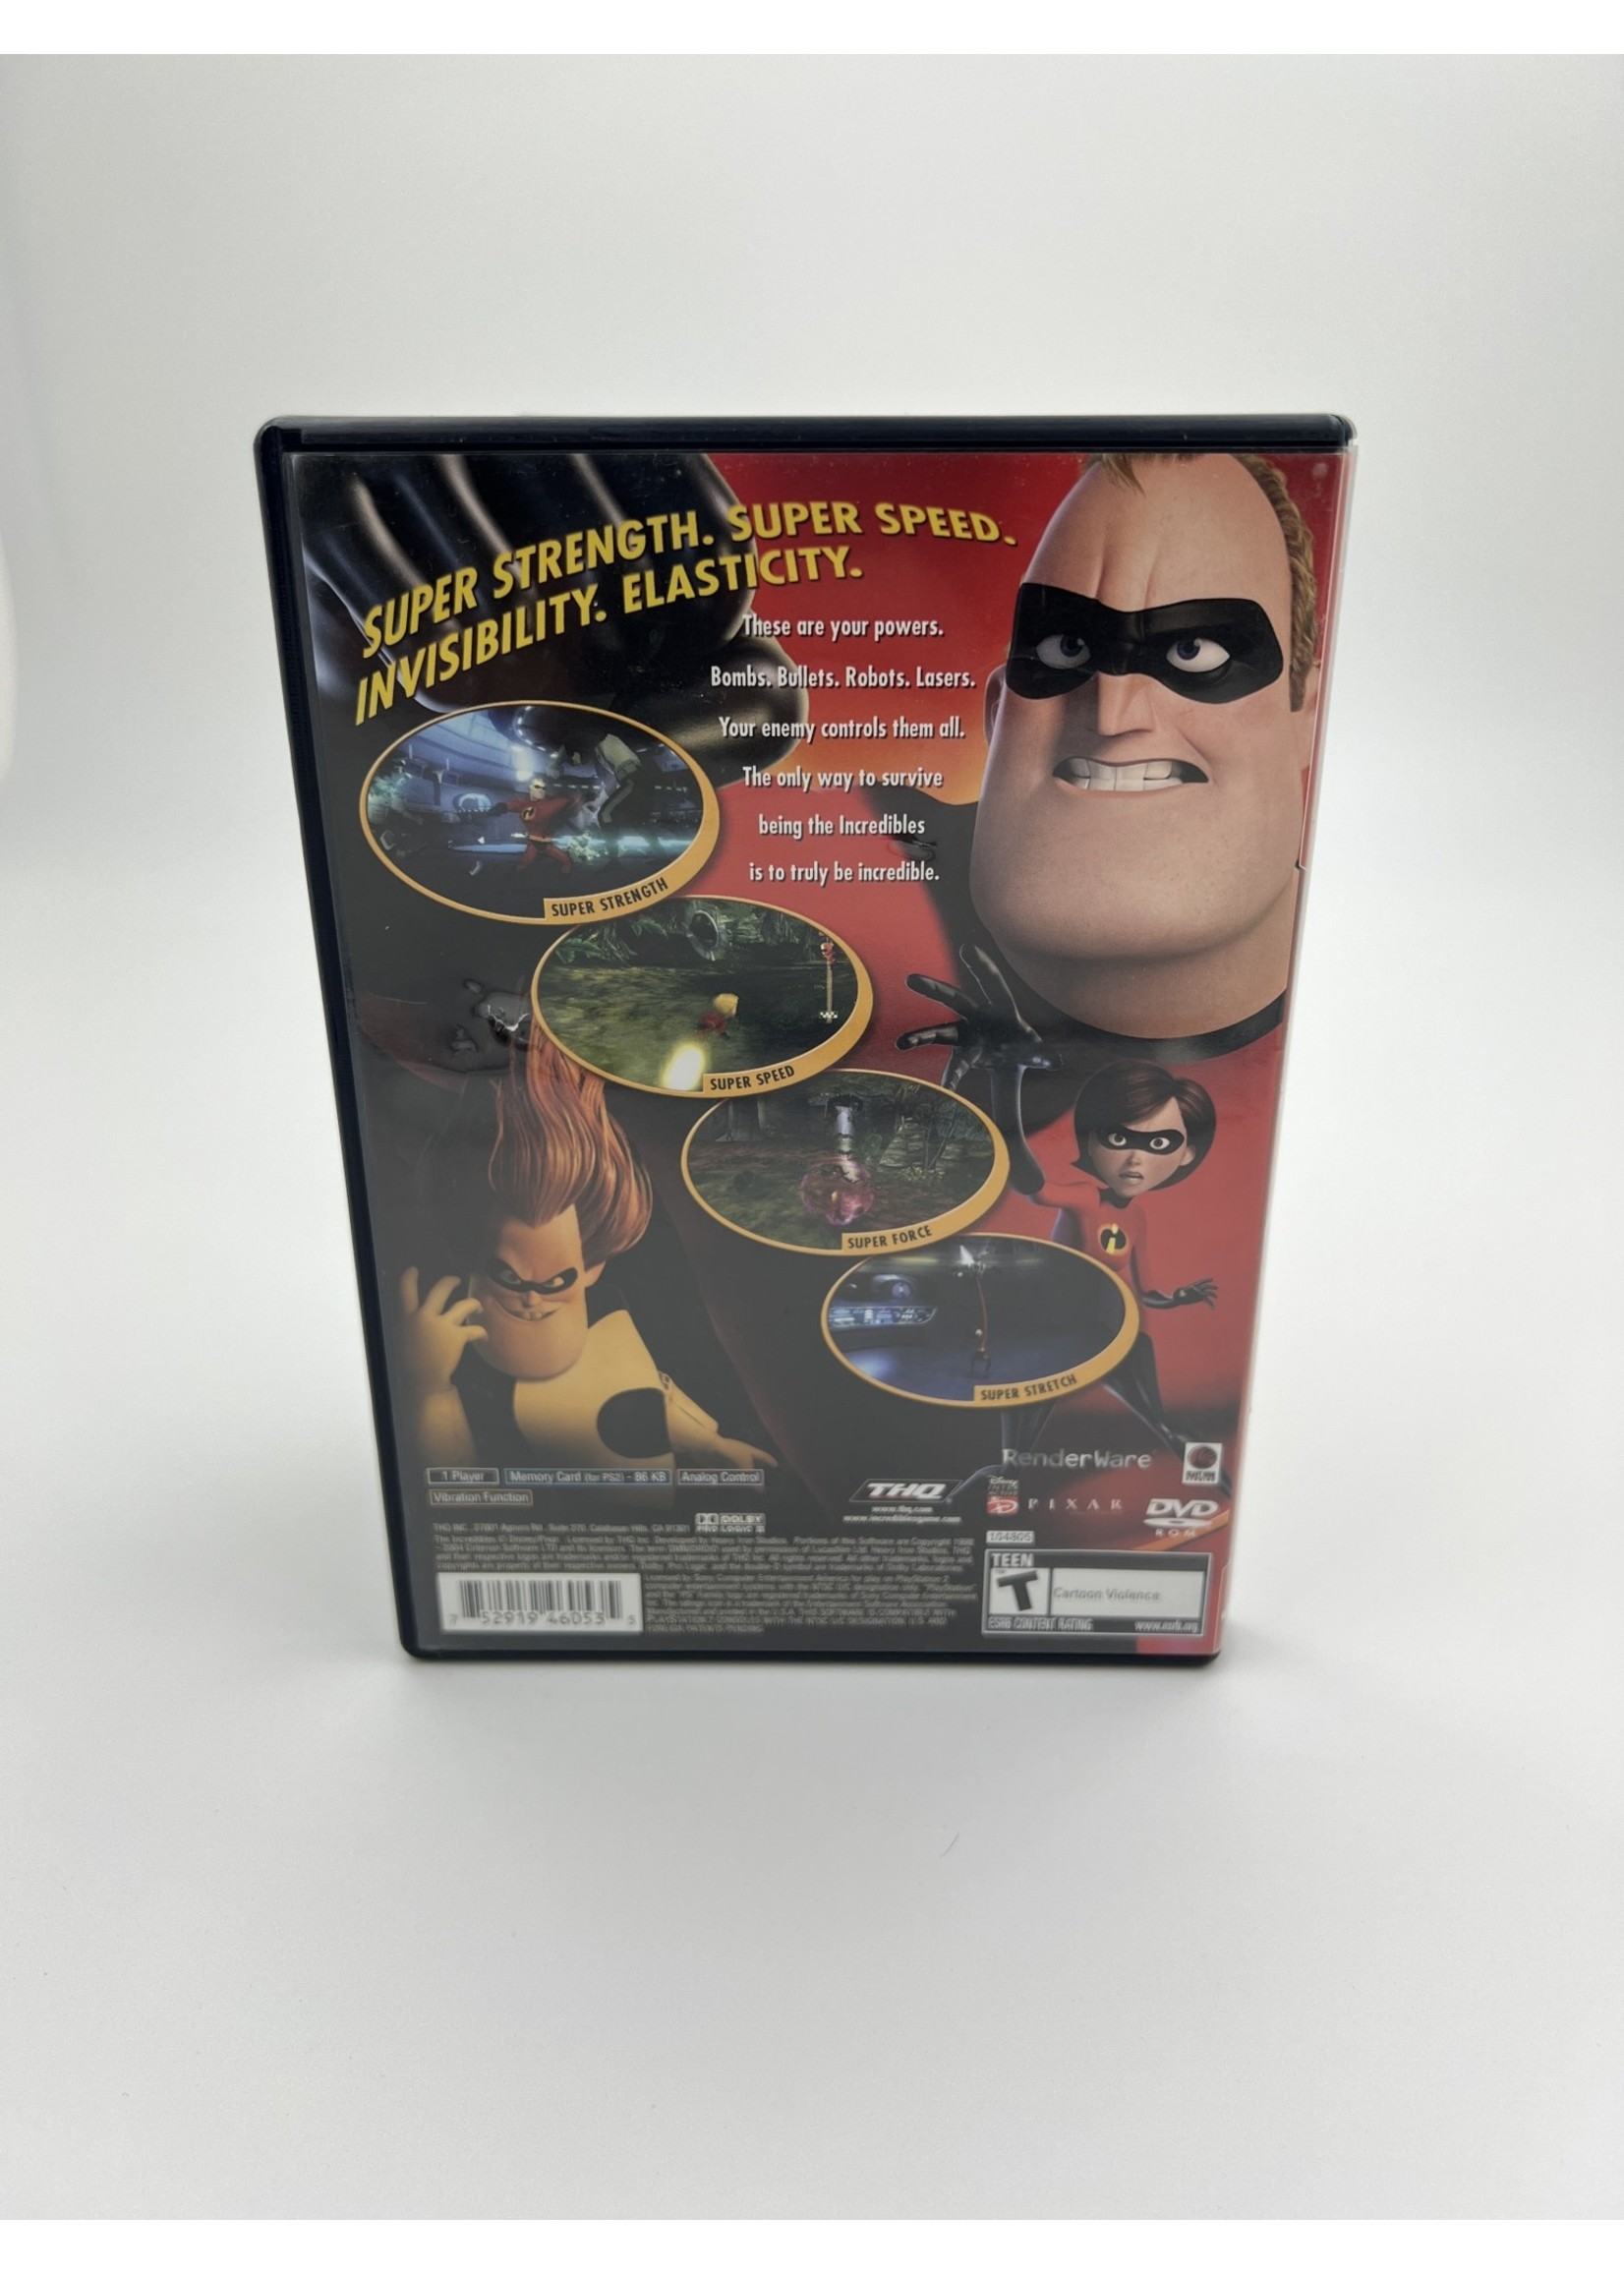 Sony Disney The Incredibles Greatest Hits Ps2